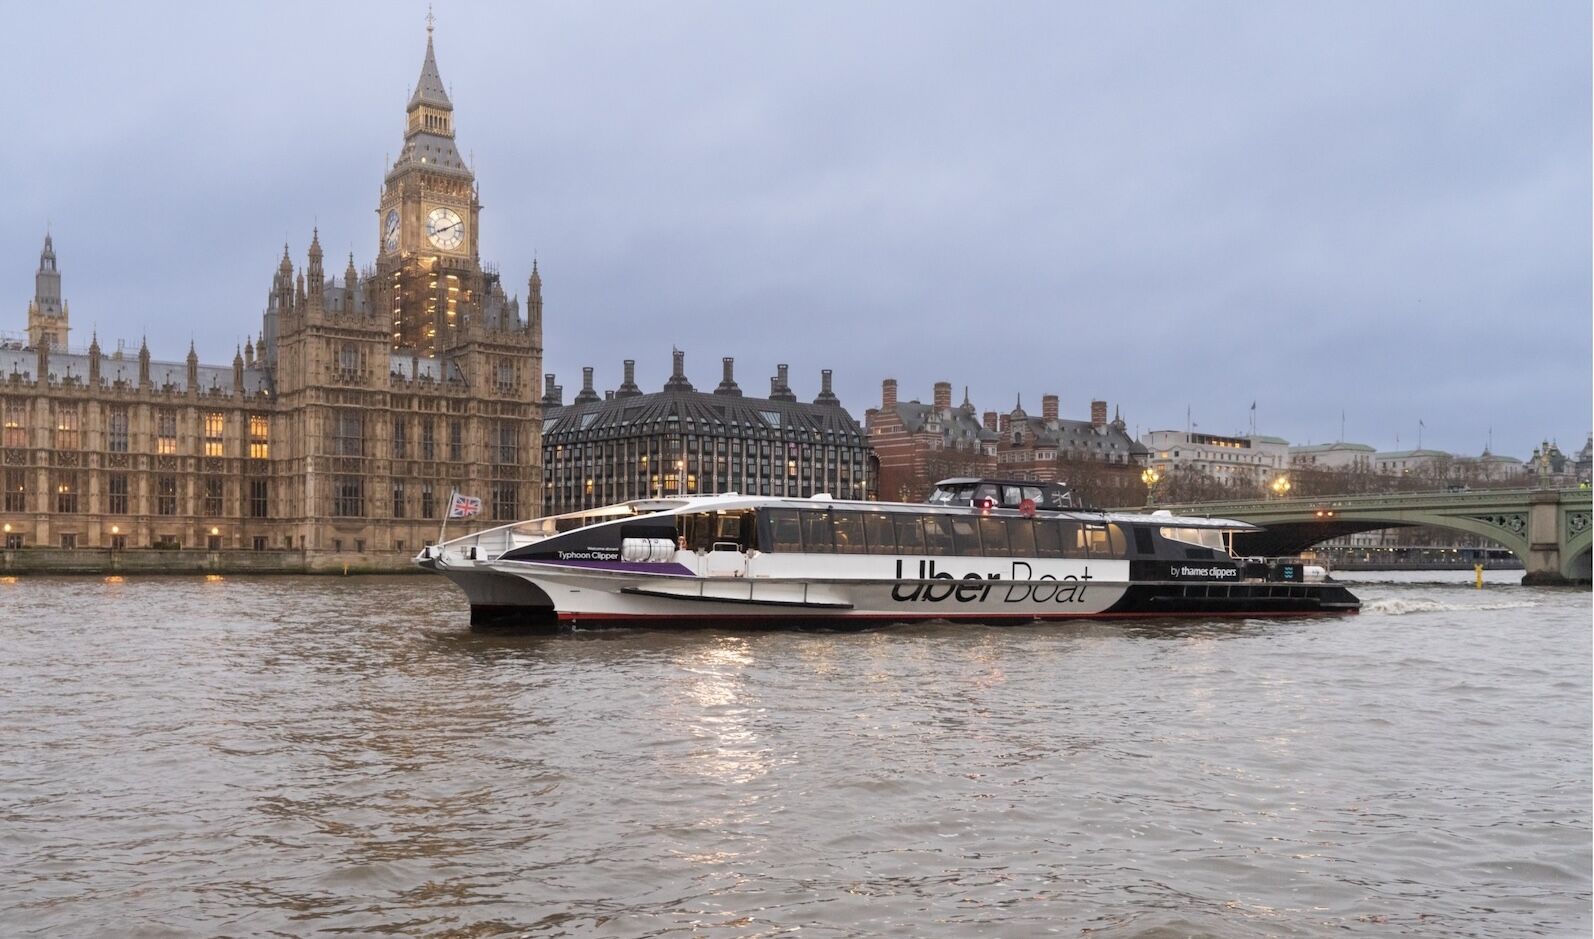 Uber Boat by Thames Clippers on the Thames river by the Palace of Westminster, London